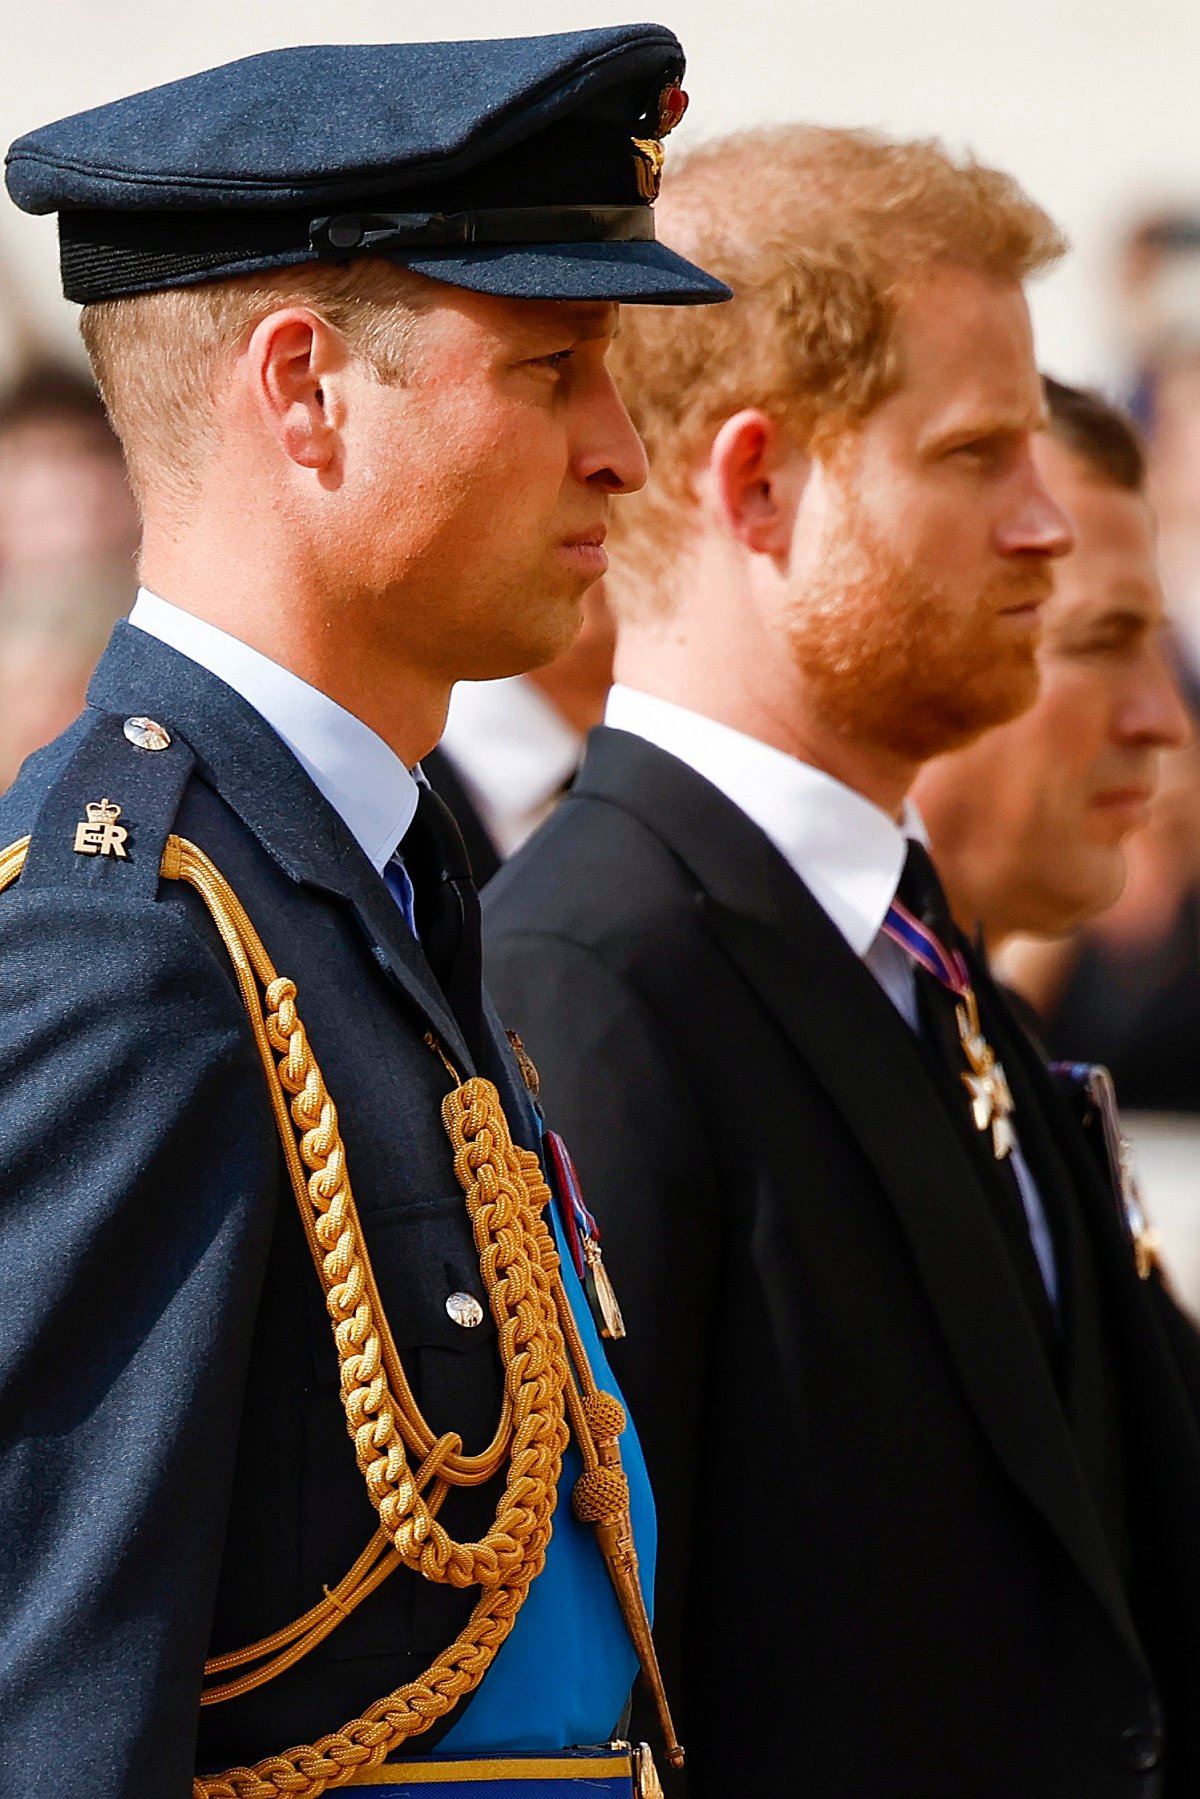 Prince William and Prince Harry walk behind the coffin of Queen Elizabeth II during the Lying Parade in the country